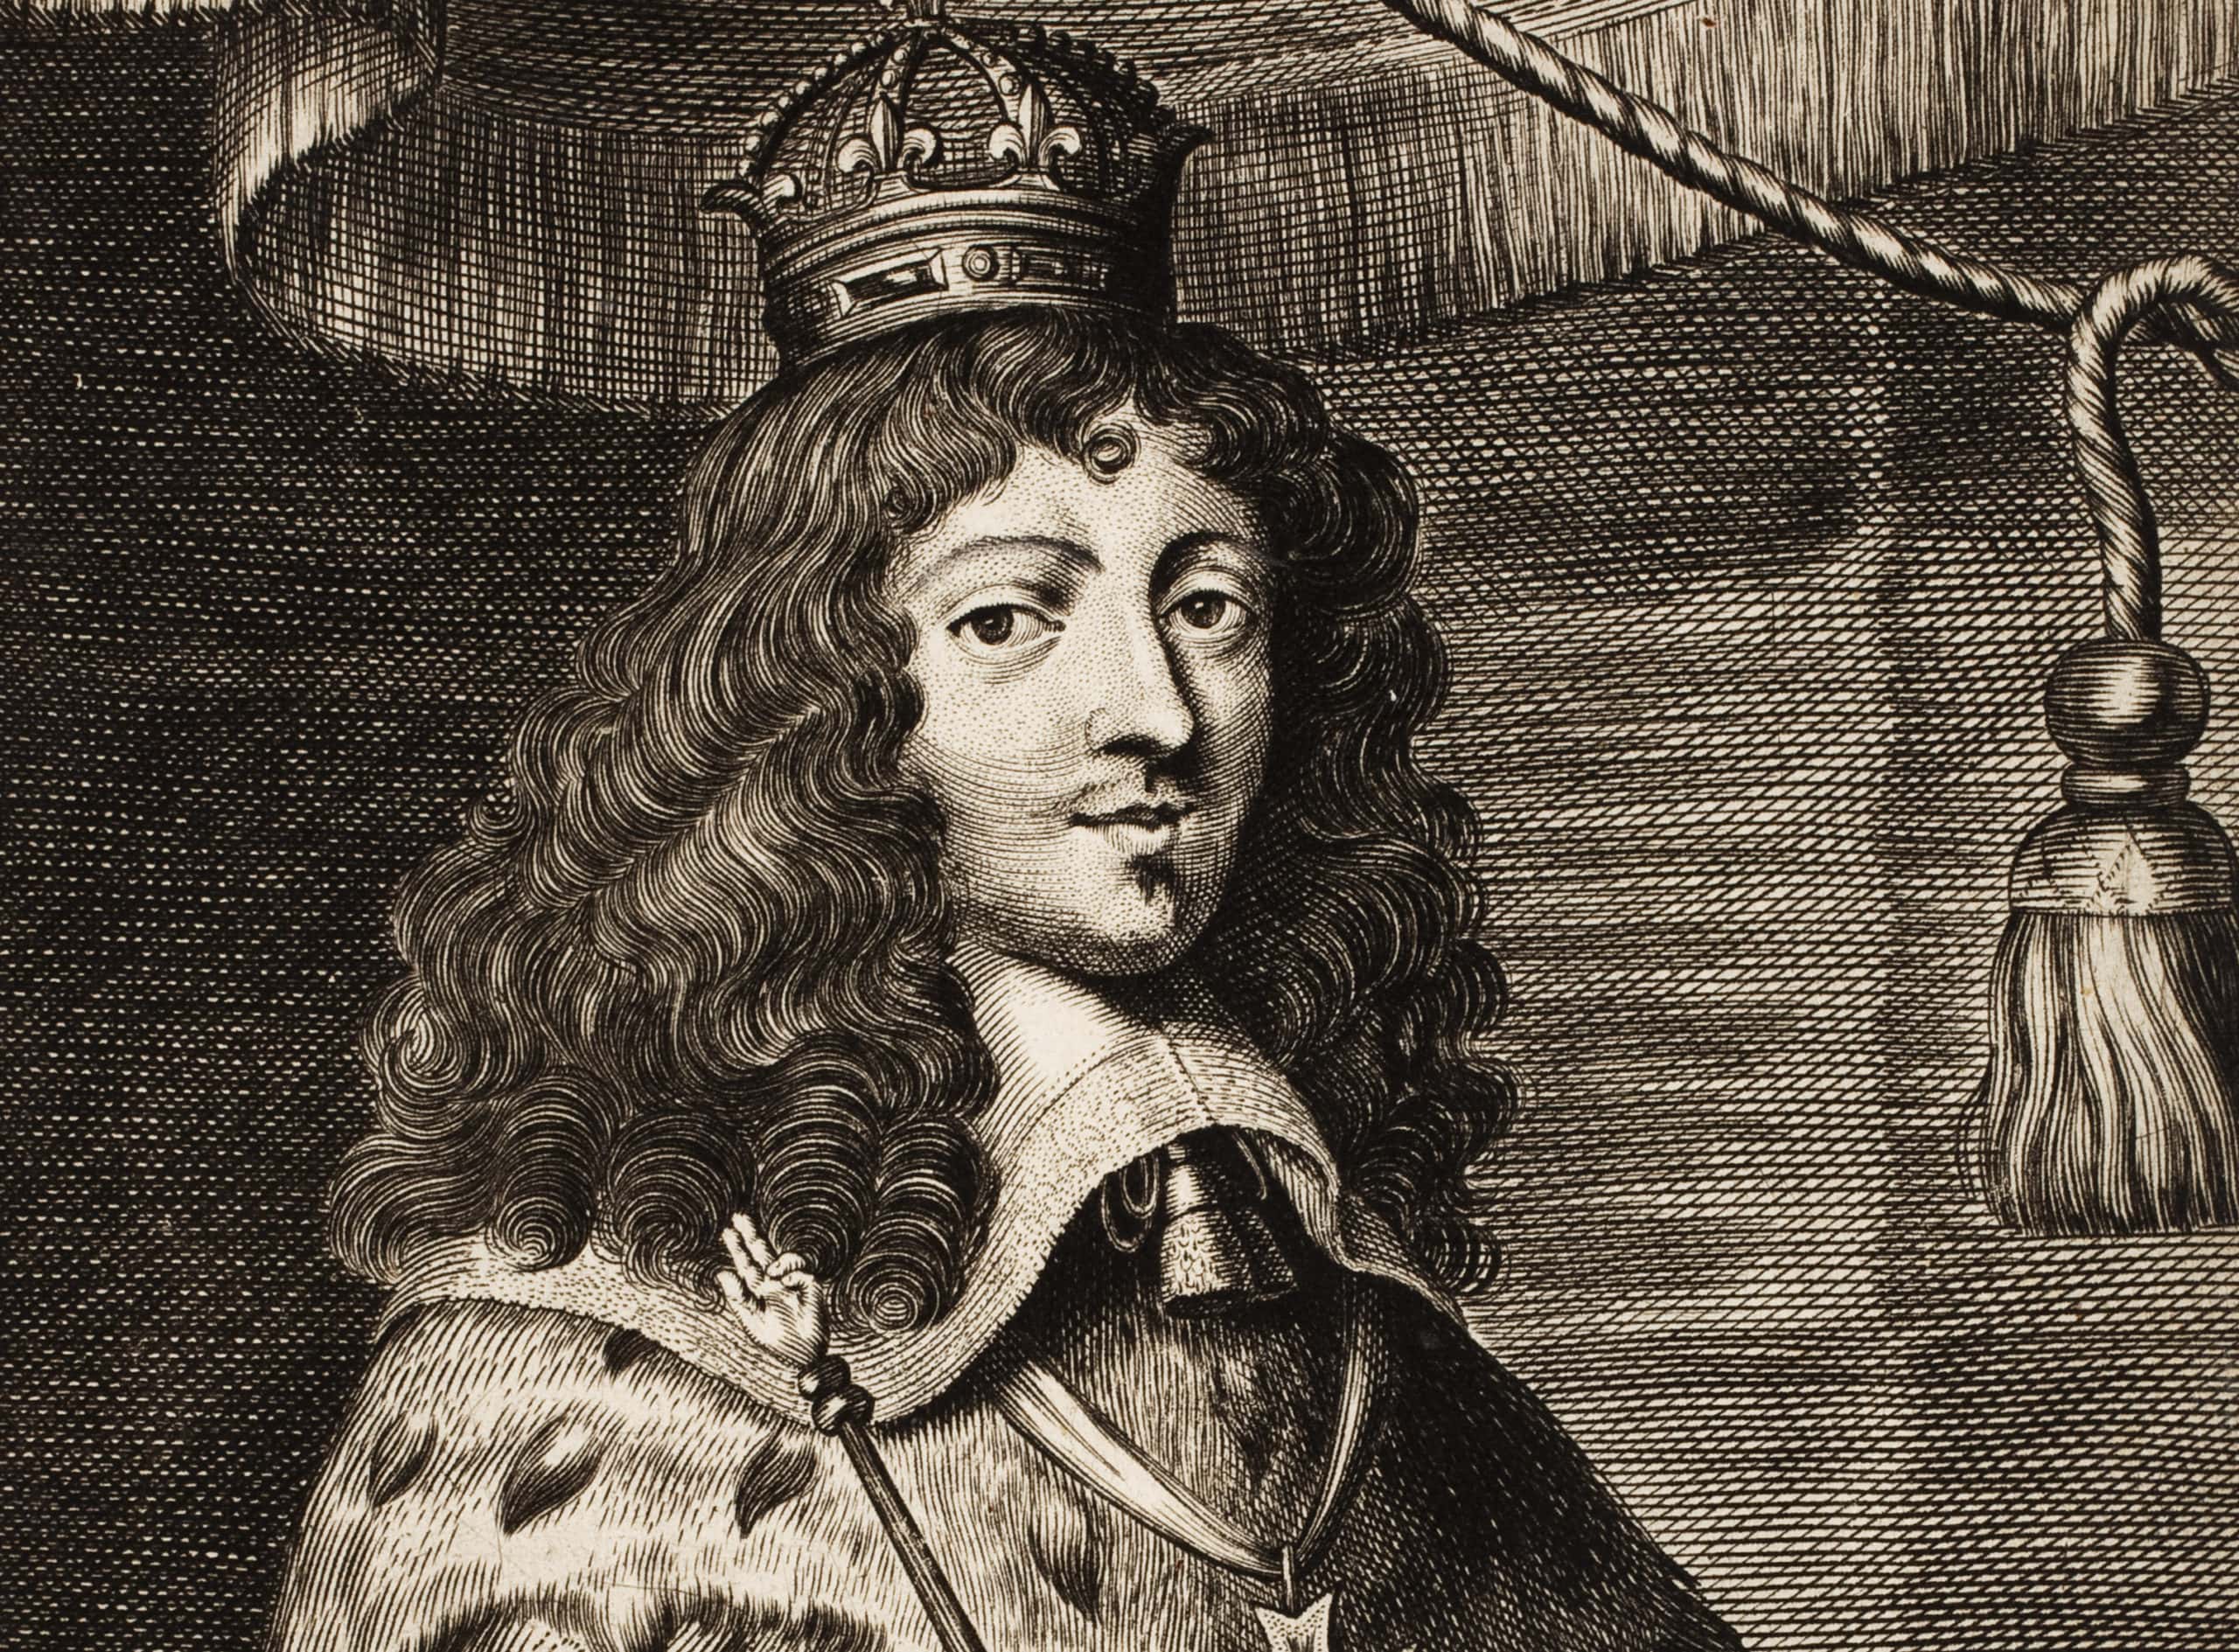 The Morning Star: Philippe I Duc d'Orléans Reconsidered